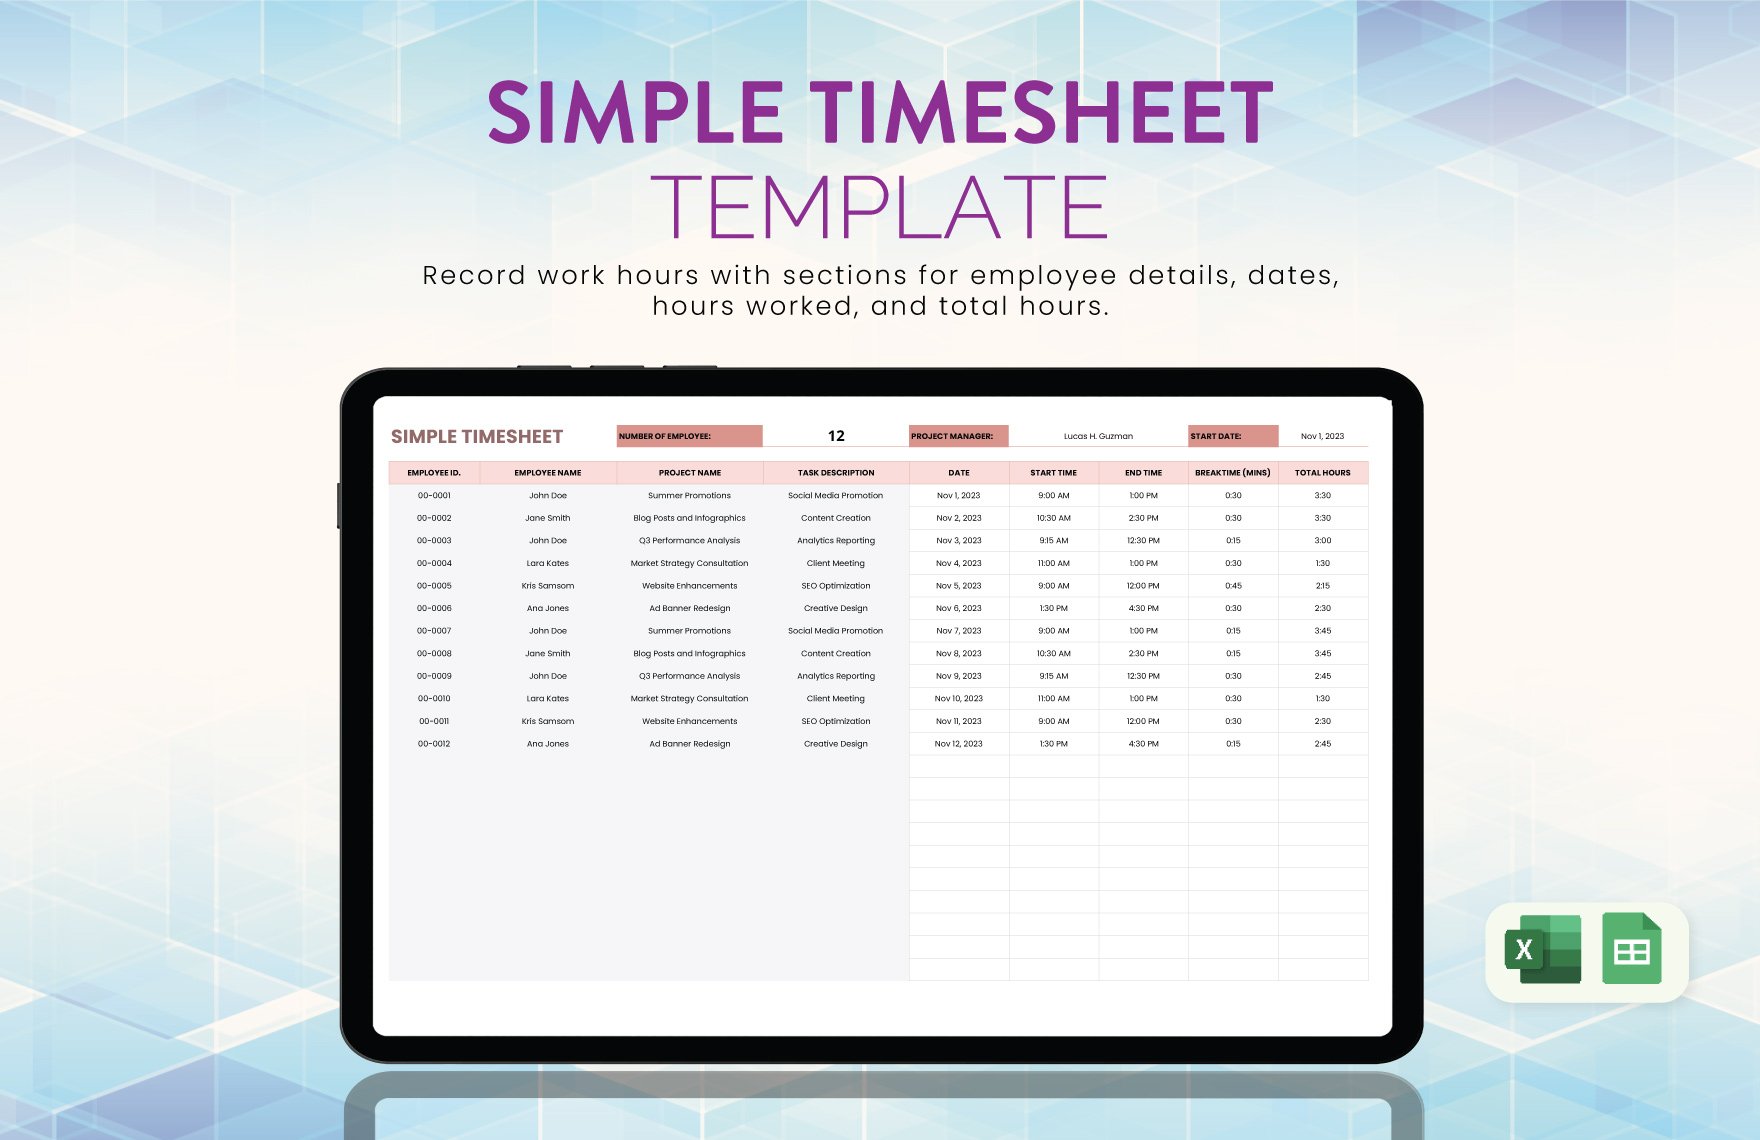 Simple Timesheet Template in Excel, Google Sheets